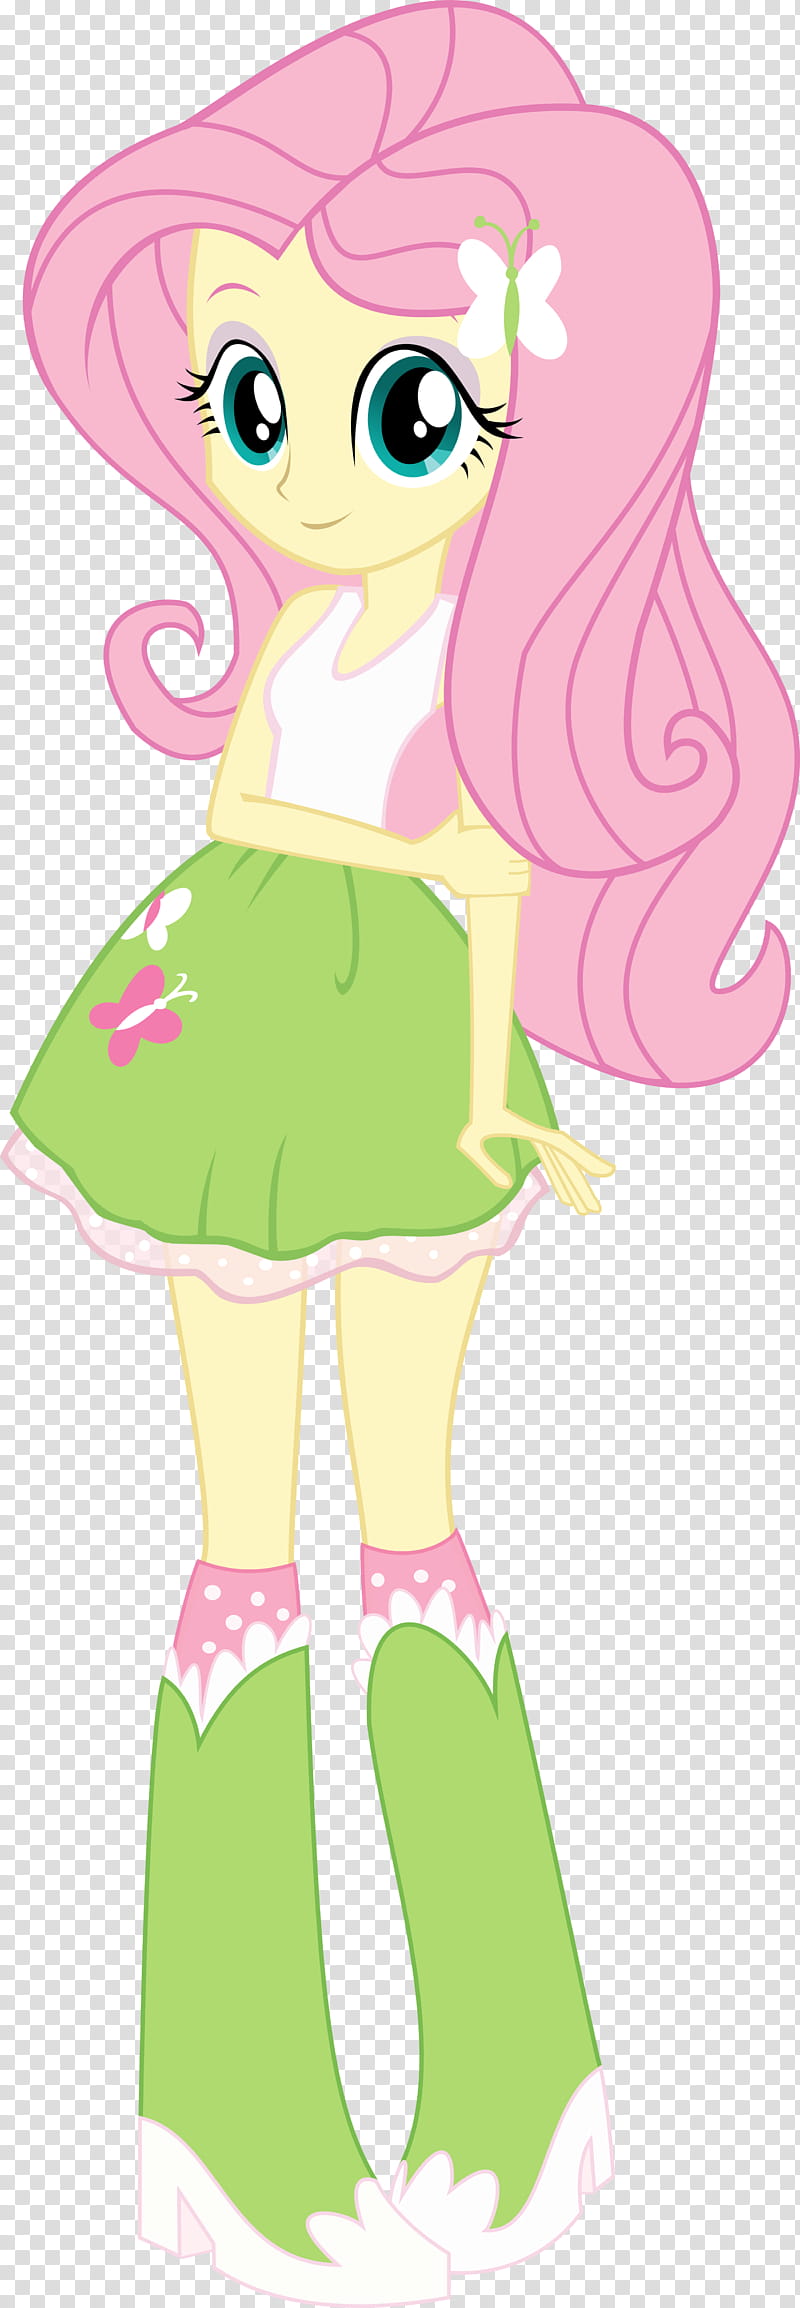 Fluttershy EQ, anime character illustration transparent background PNG clipart